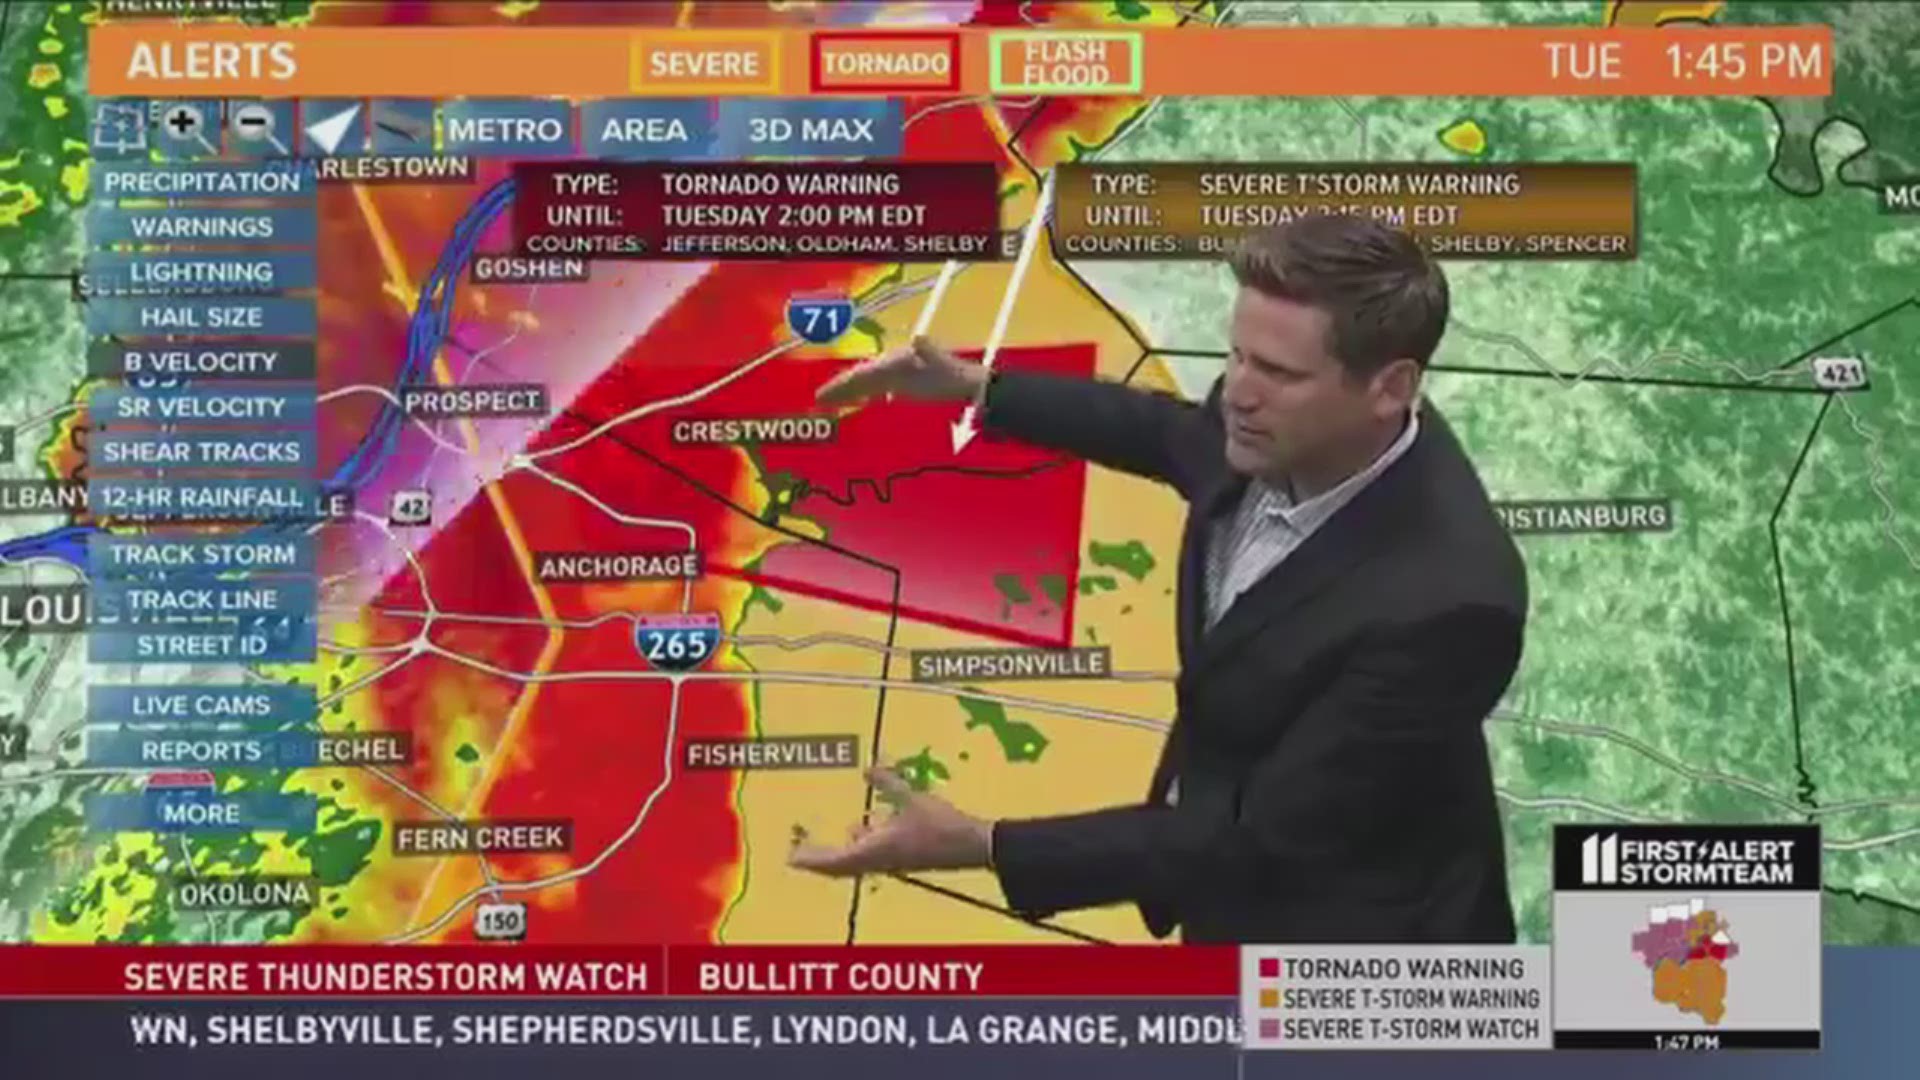 The WHAS11 Storm team was tracking a tornado live during our severe weather coverage on June 27th, 2018